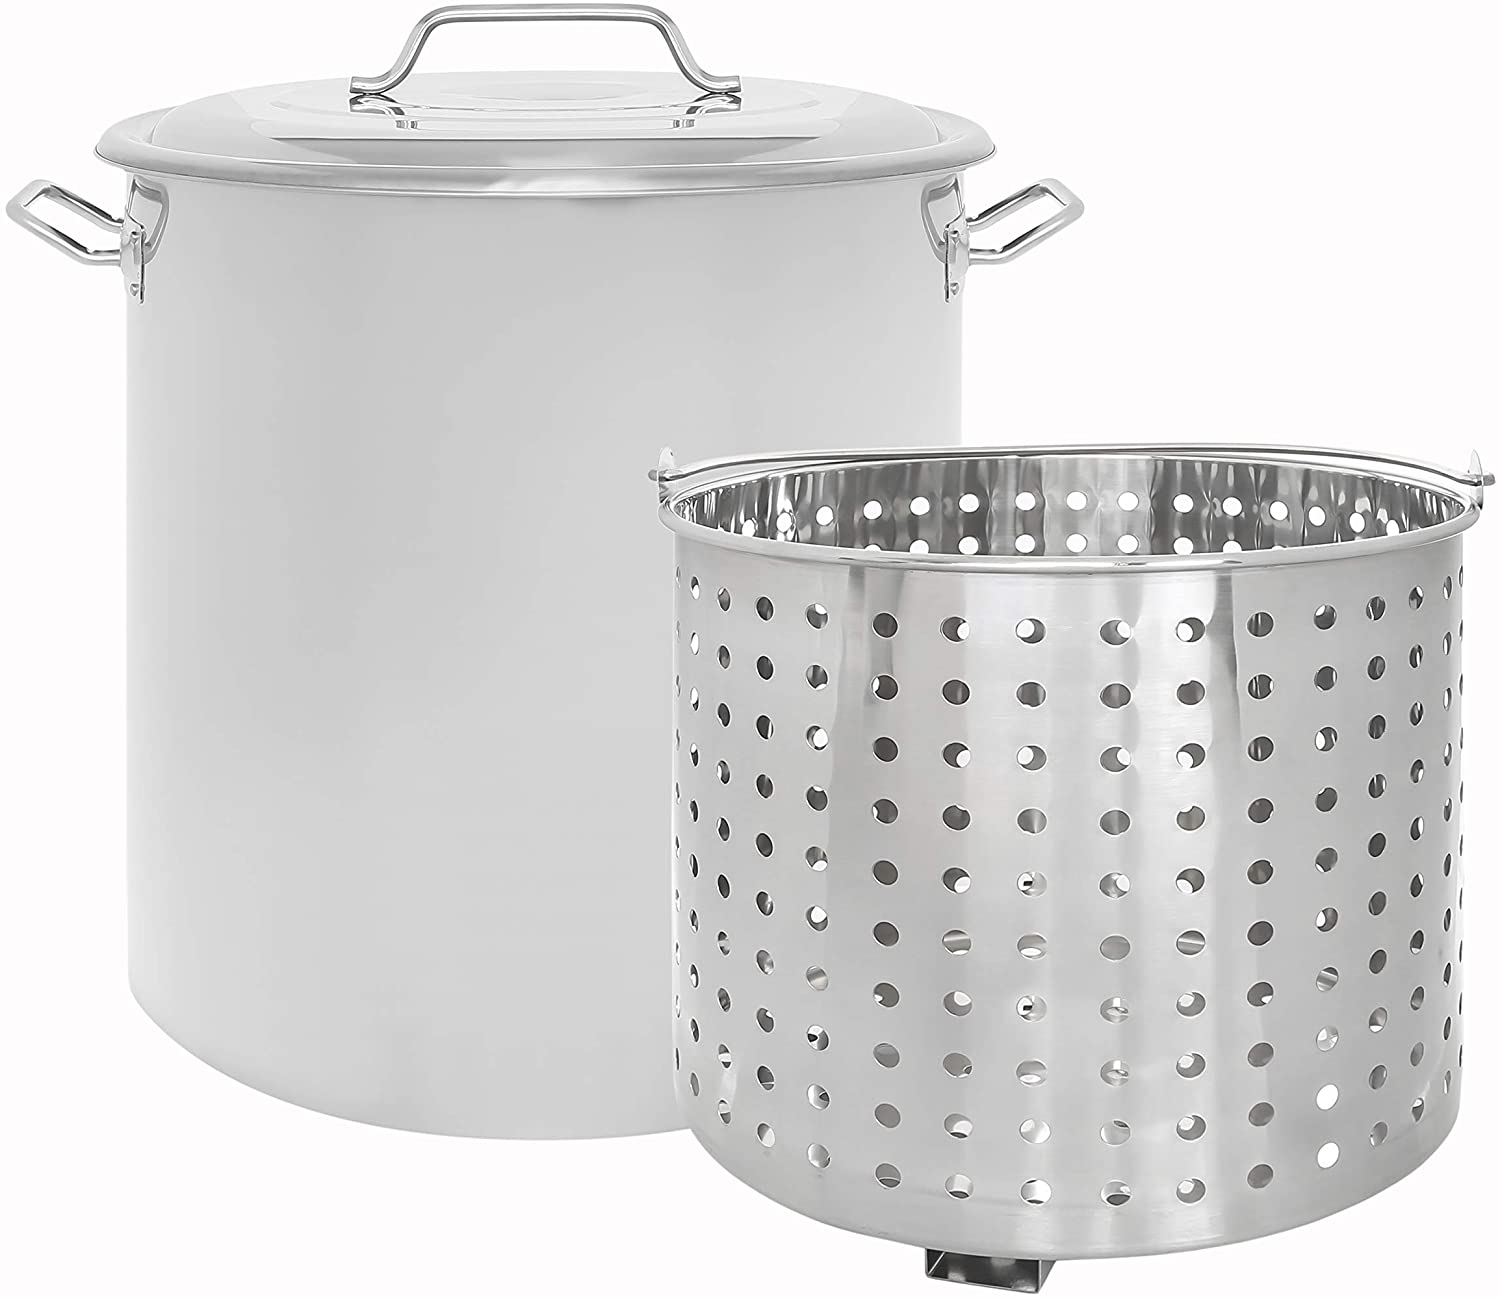 Stainless Steel Stock Pot w/ Steamer Basket - Cookware great for boiling and steaming